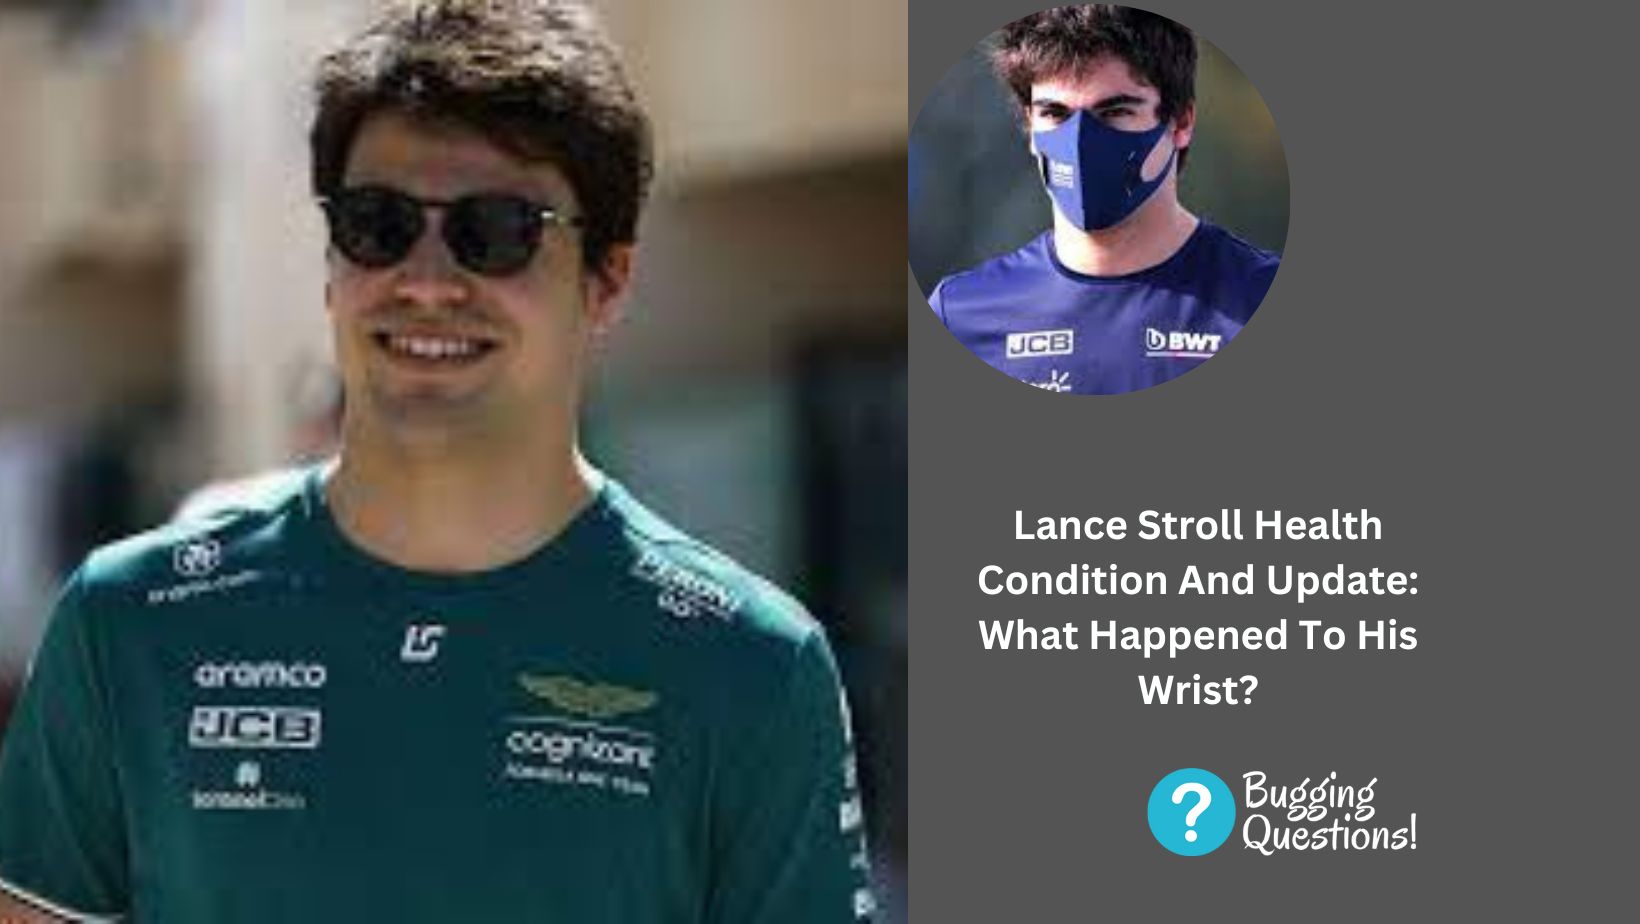 Lance Stroll Health Condition And Update: What Happened To His Wrist?